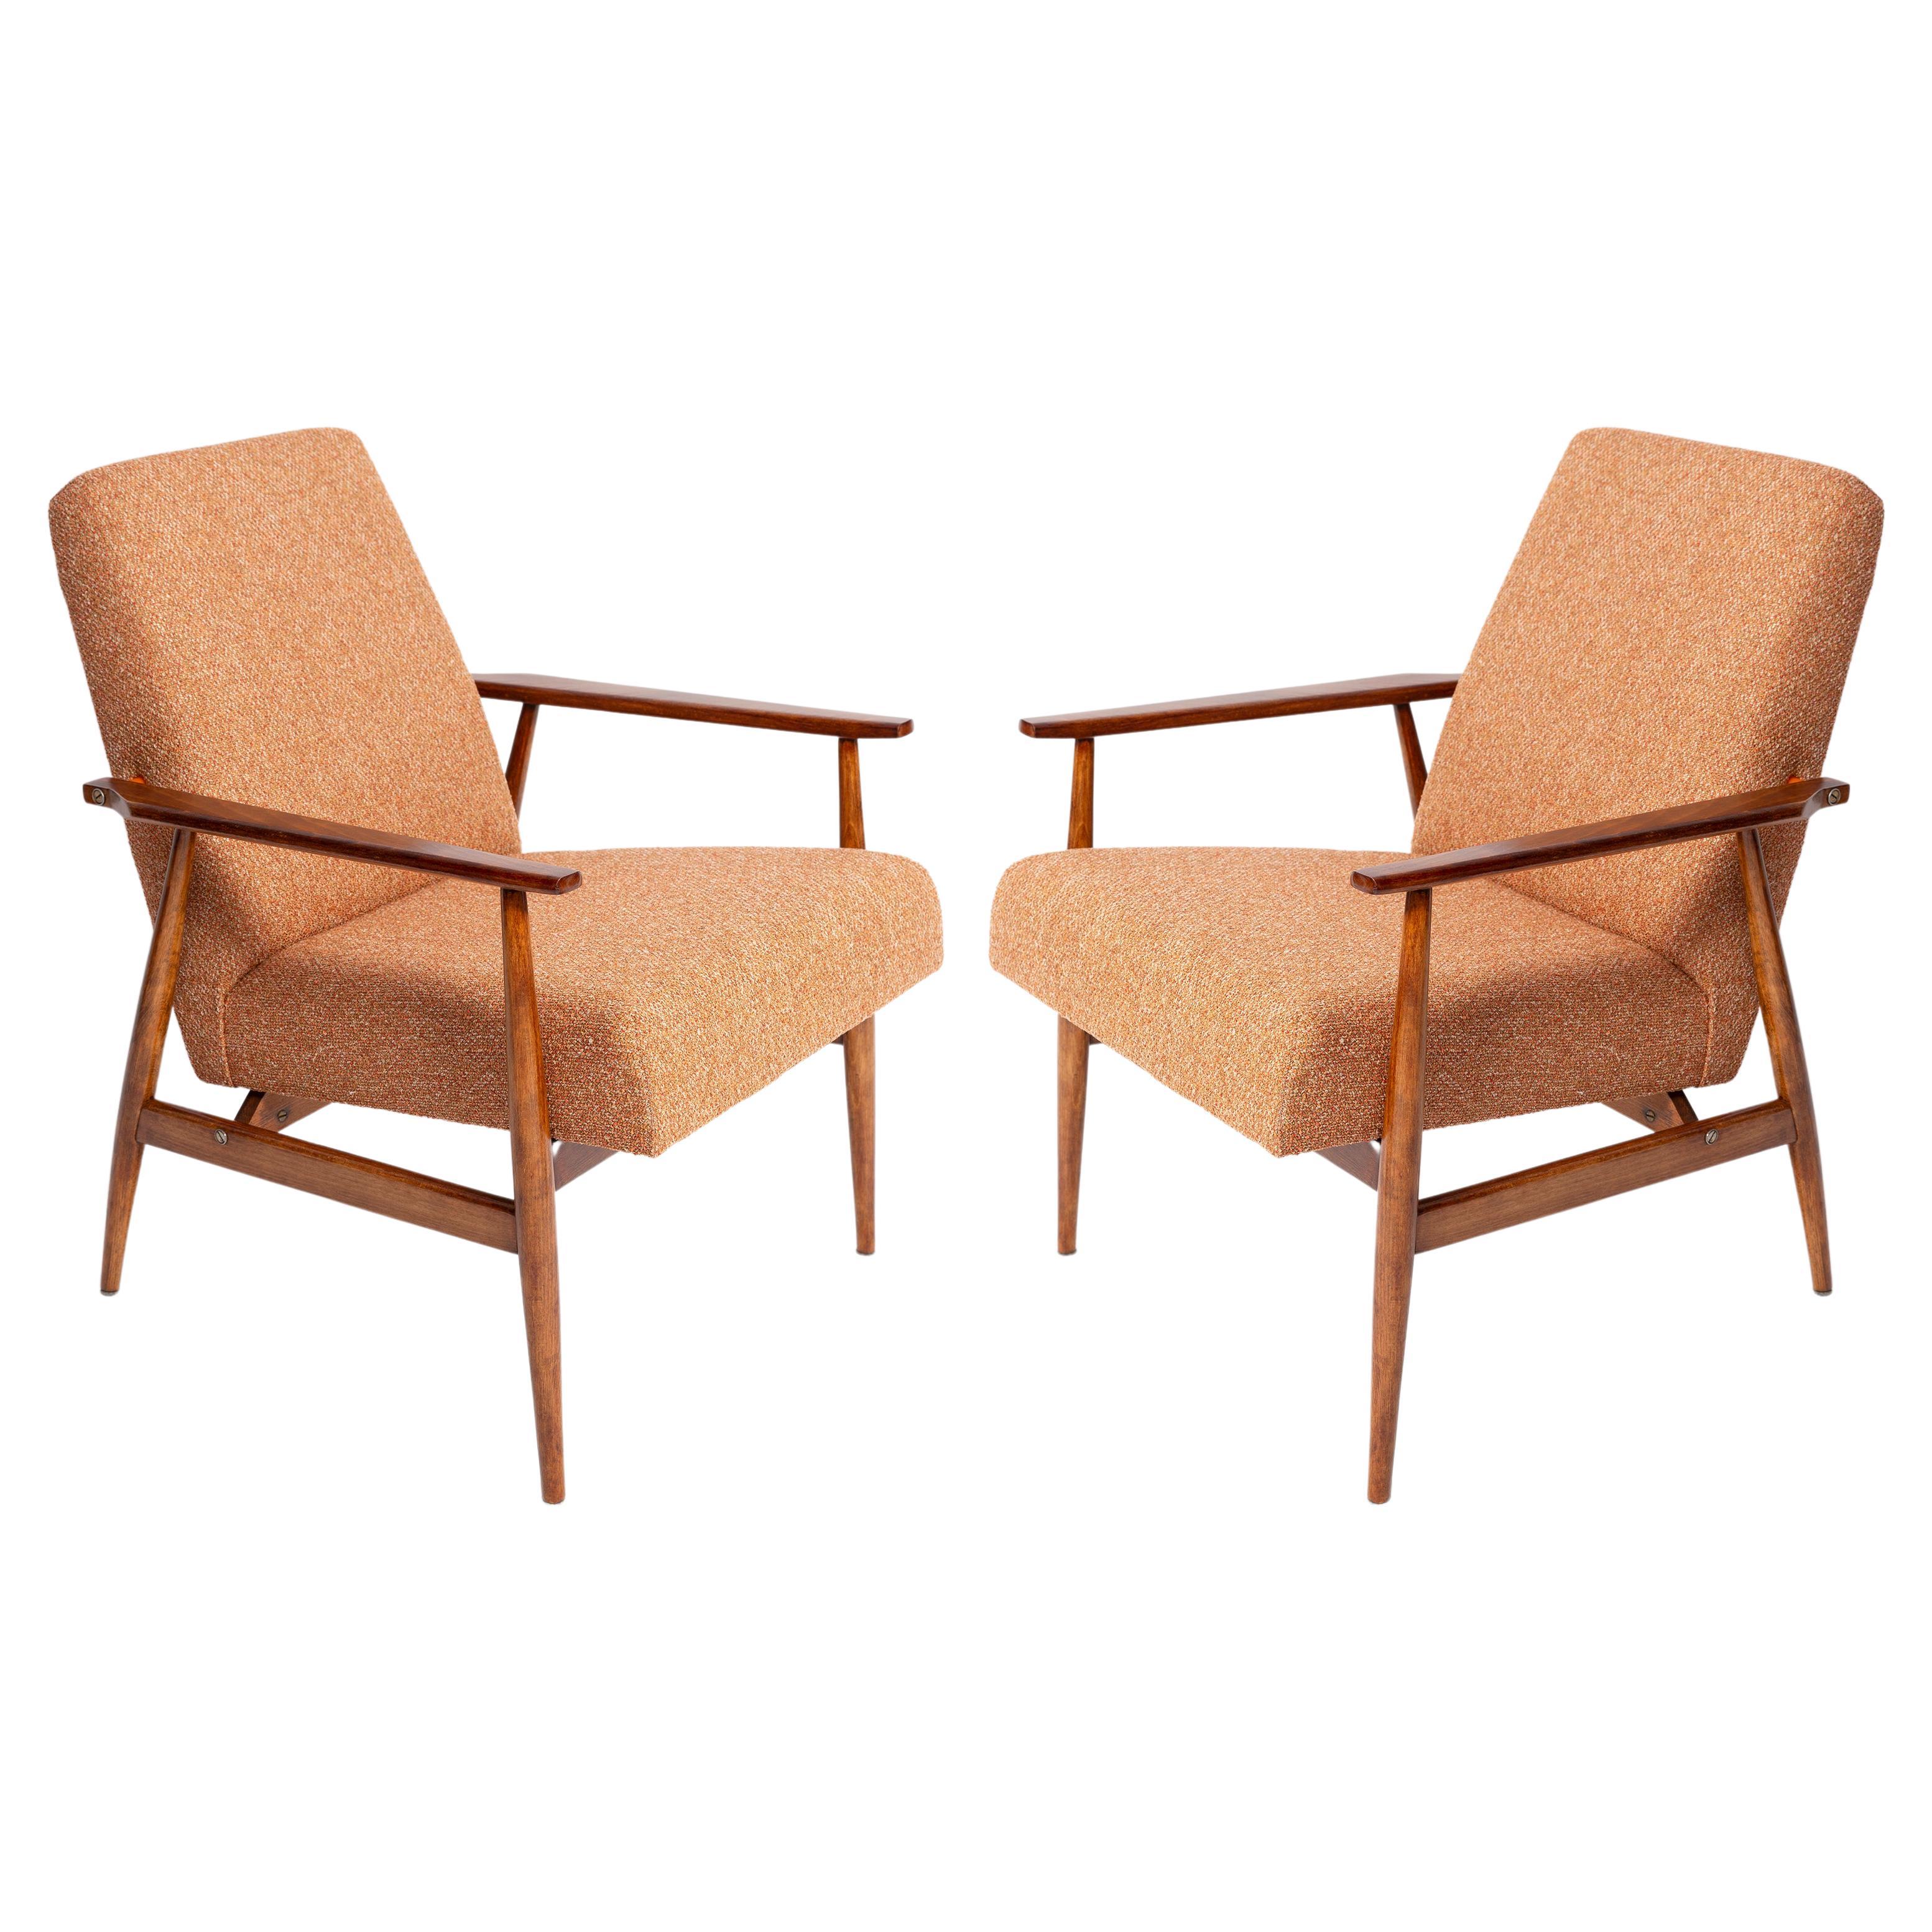 Set of Two Mid-Century Melange Dante Armchairs, H. Lis, 1960s For Sale